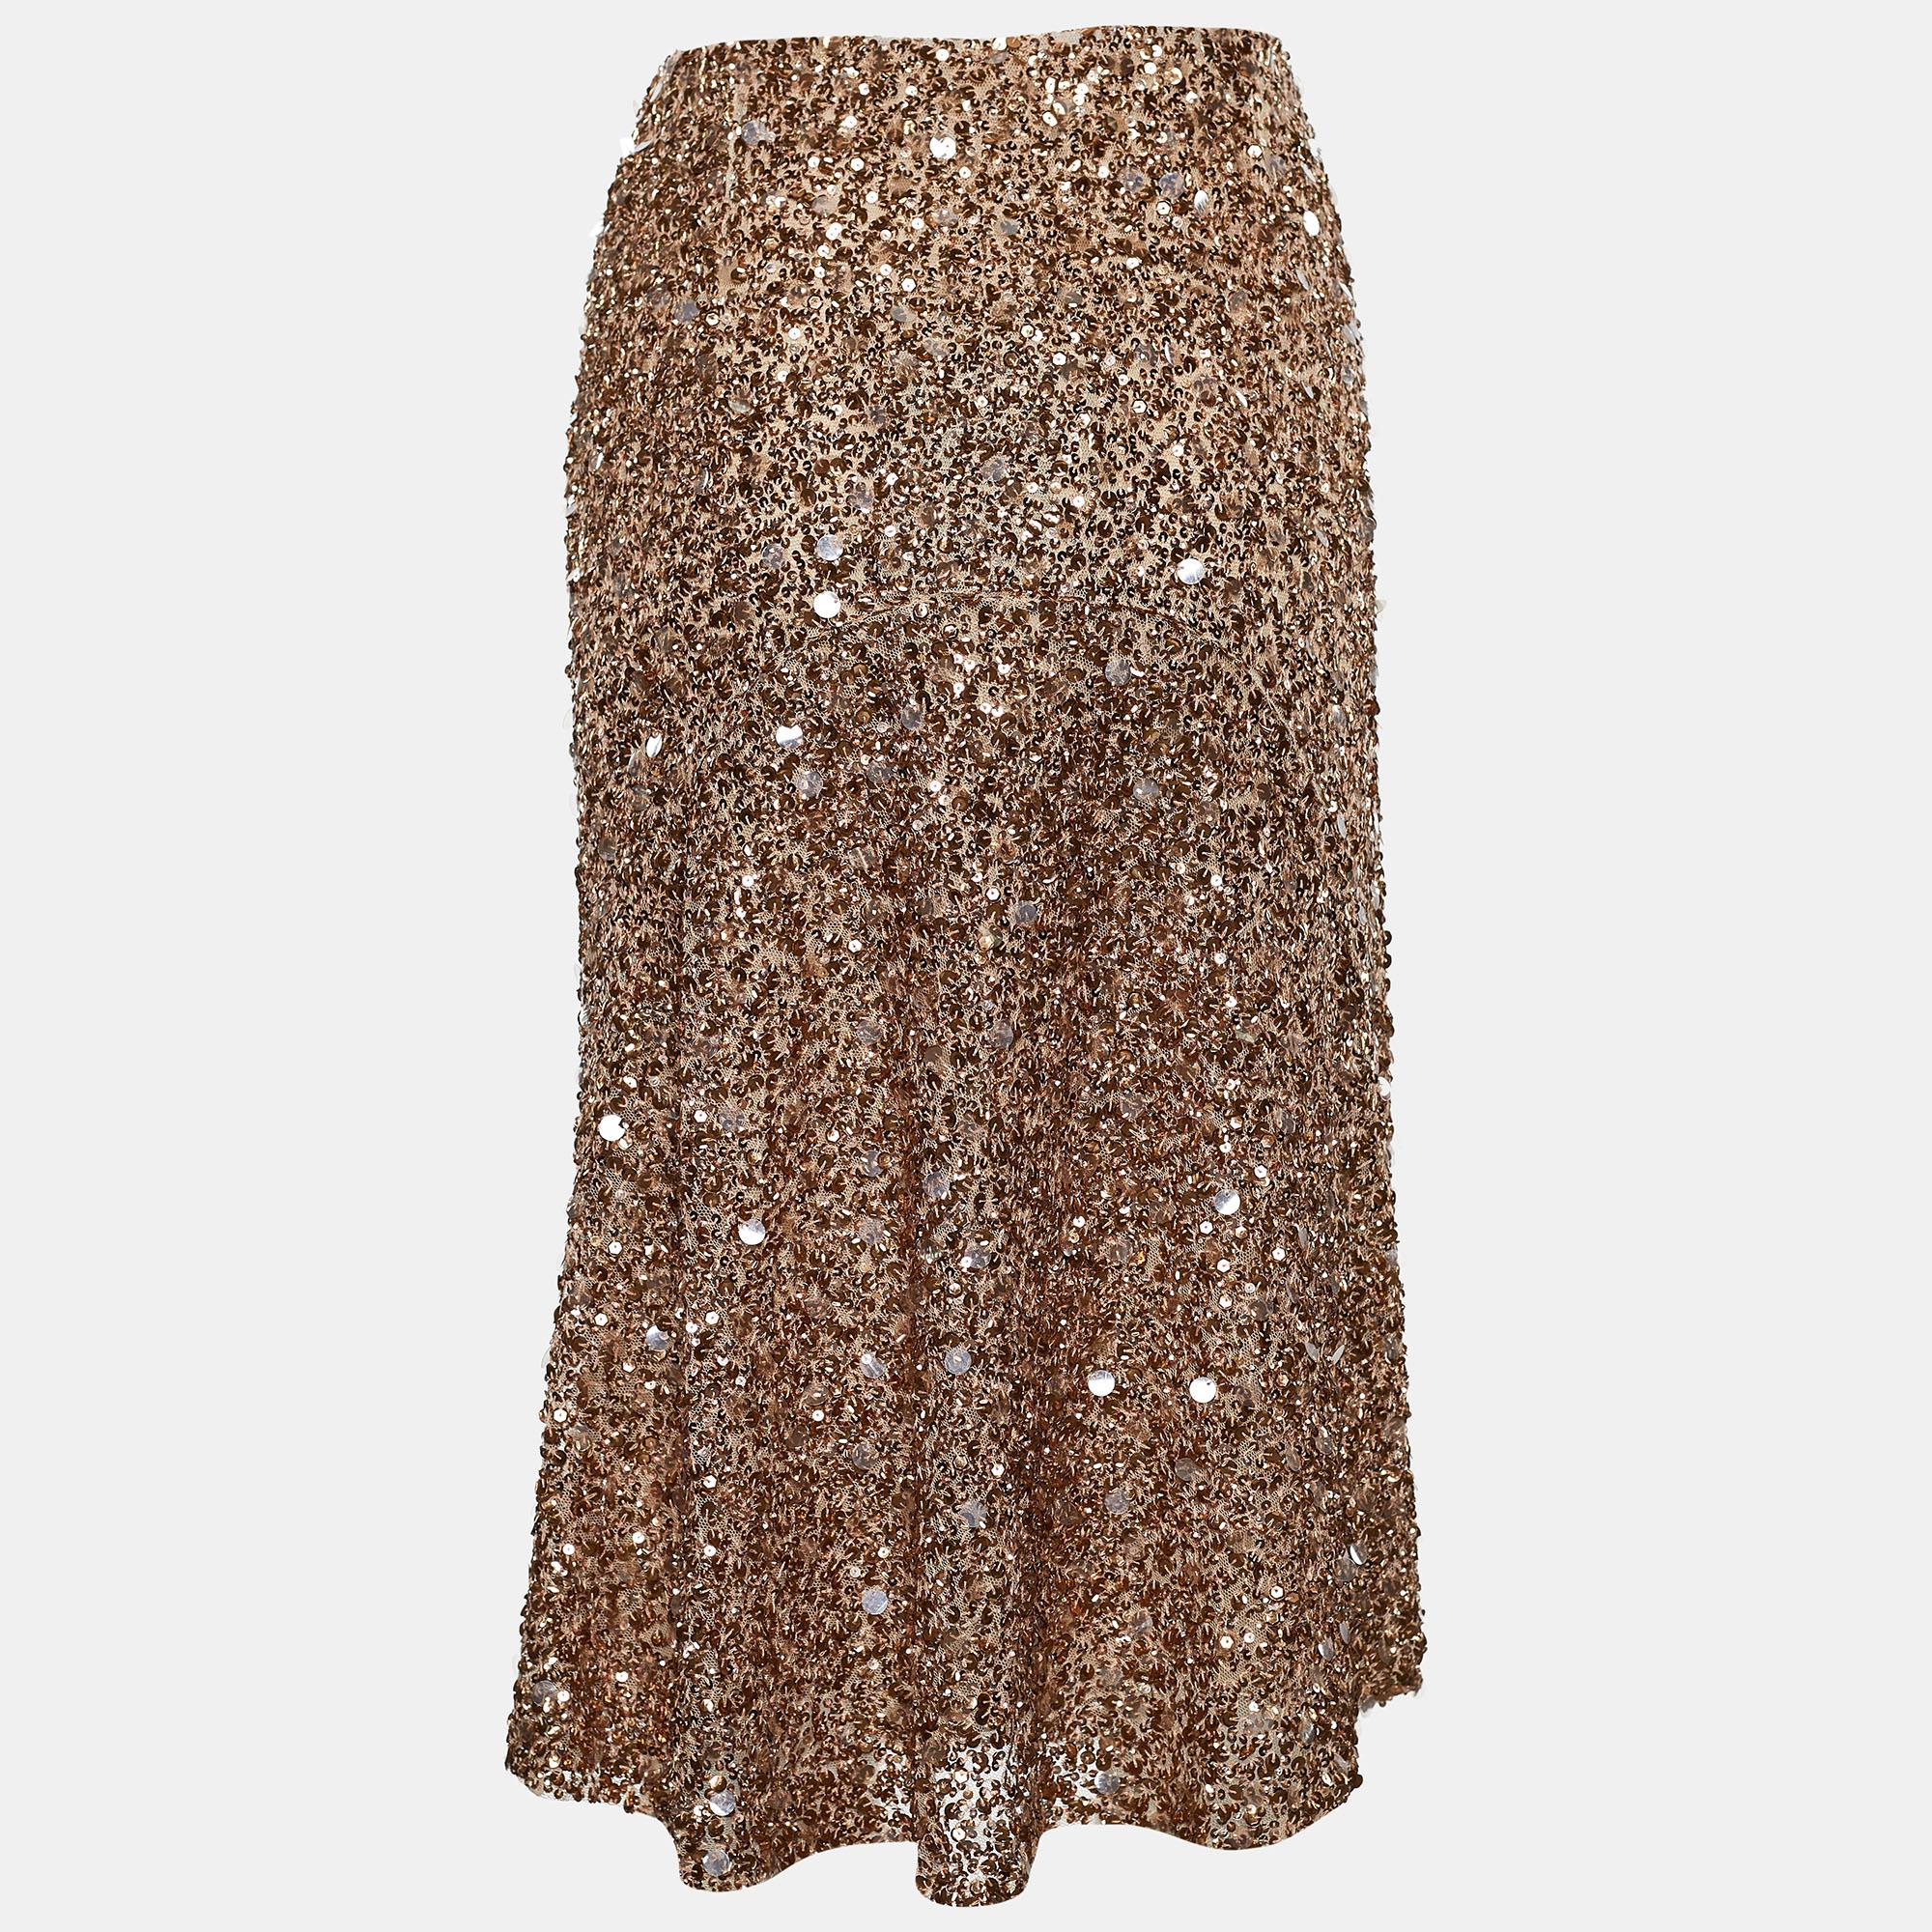 With its glittery appearance and party vibes, this fabulous Valentino skirt will surely make heads turn! Covered in metallic-gold sequin embellishments, this skirt has a knee-length silhouette that will help your ensemble shine all night! It is